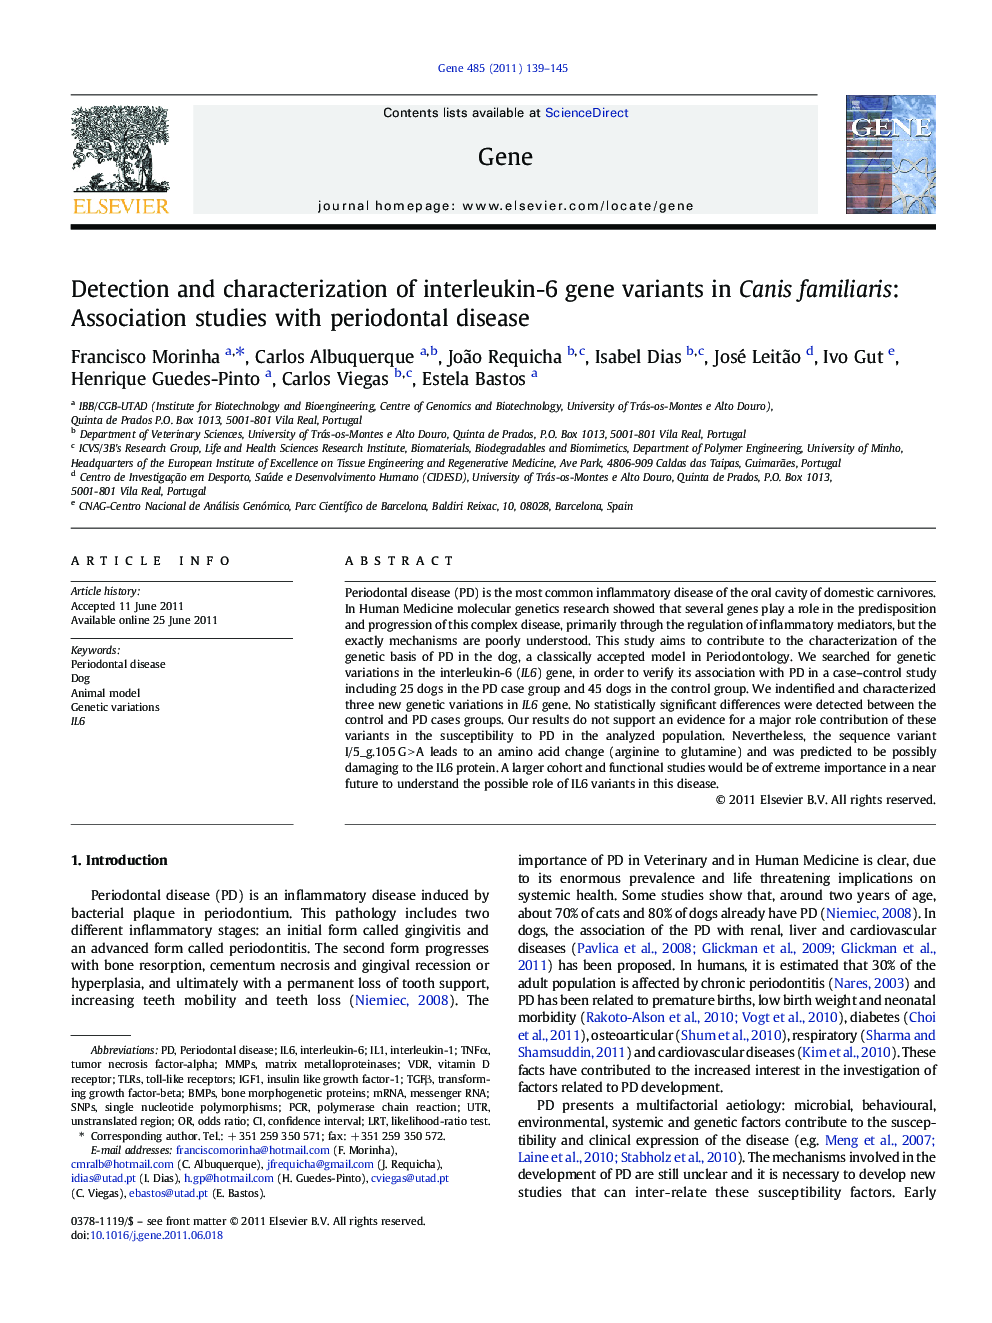 Detection and characterization of interleukin-6 gene variants in Canis familiaris: Association studies with periodontal disease